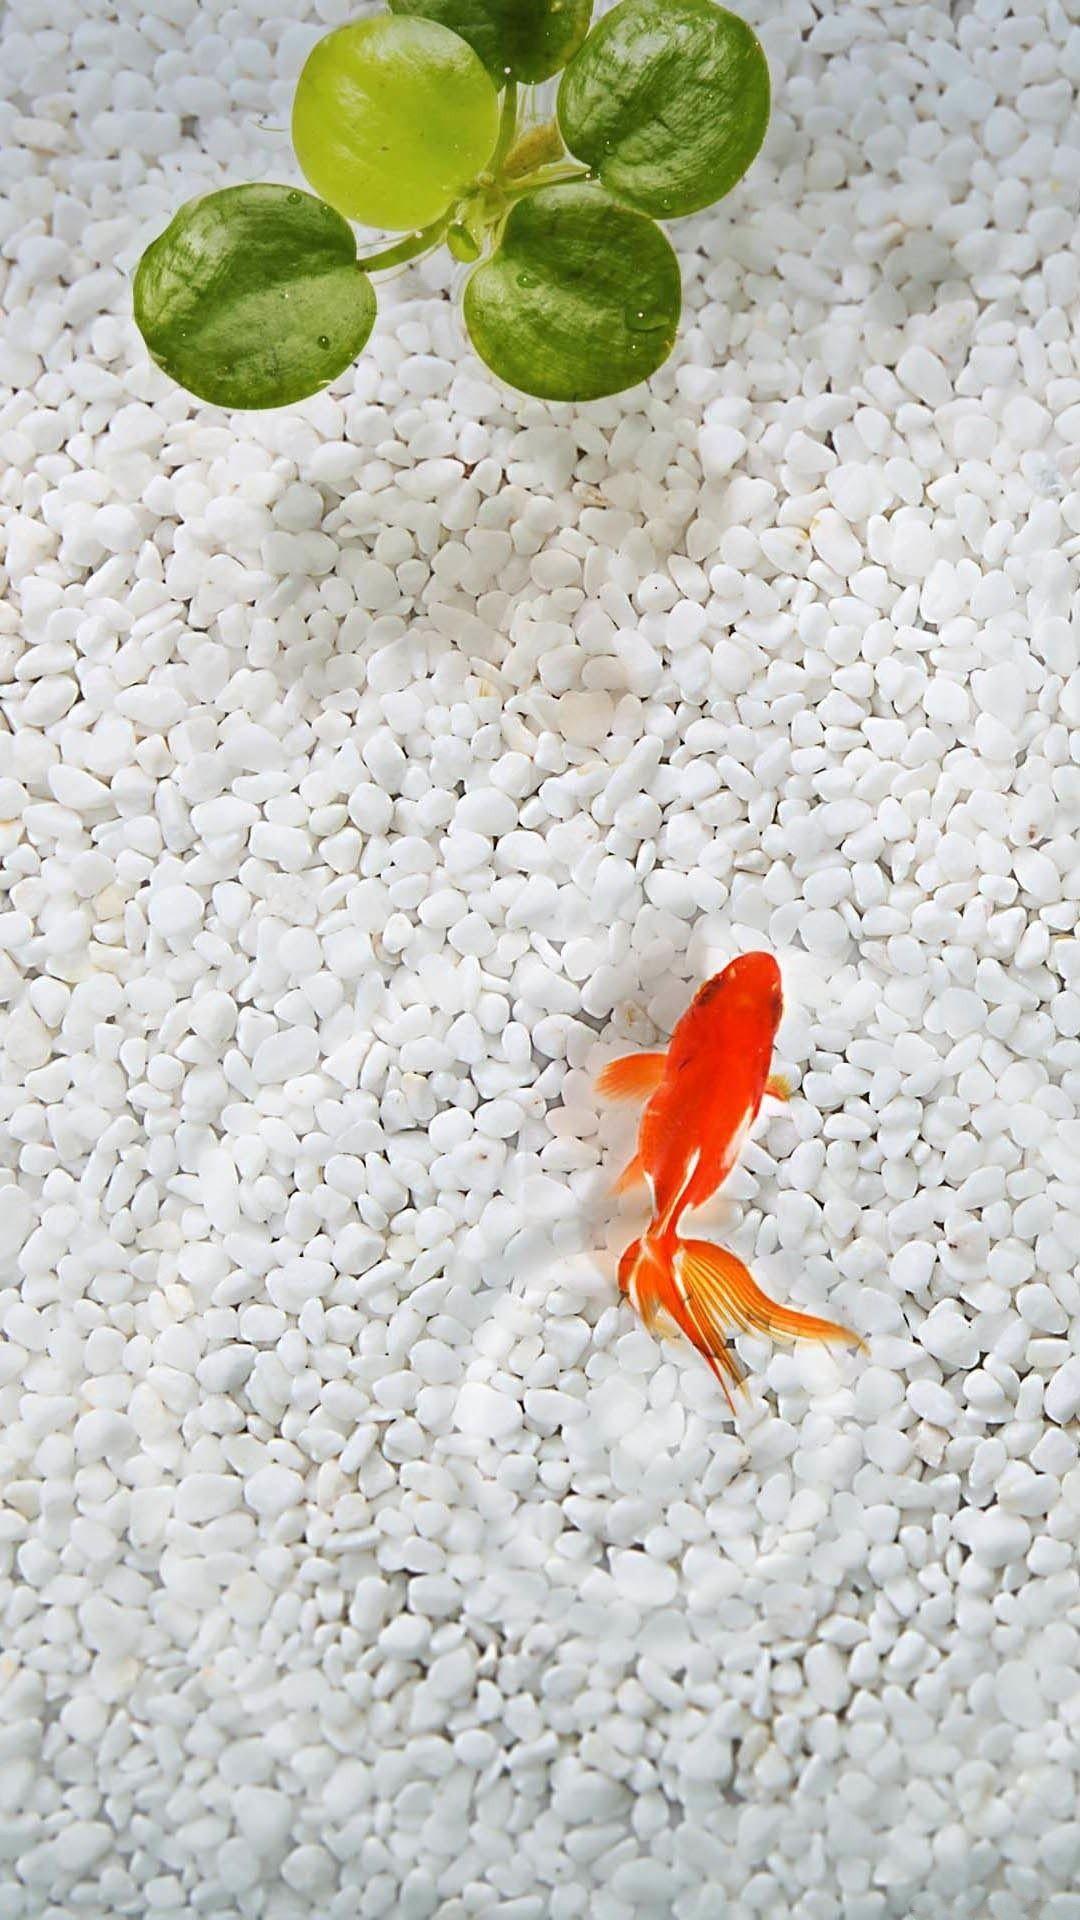 Realistic Gold Fish iPhone Wallpaper. Tap to see more